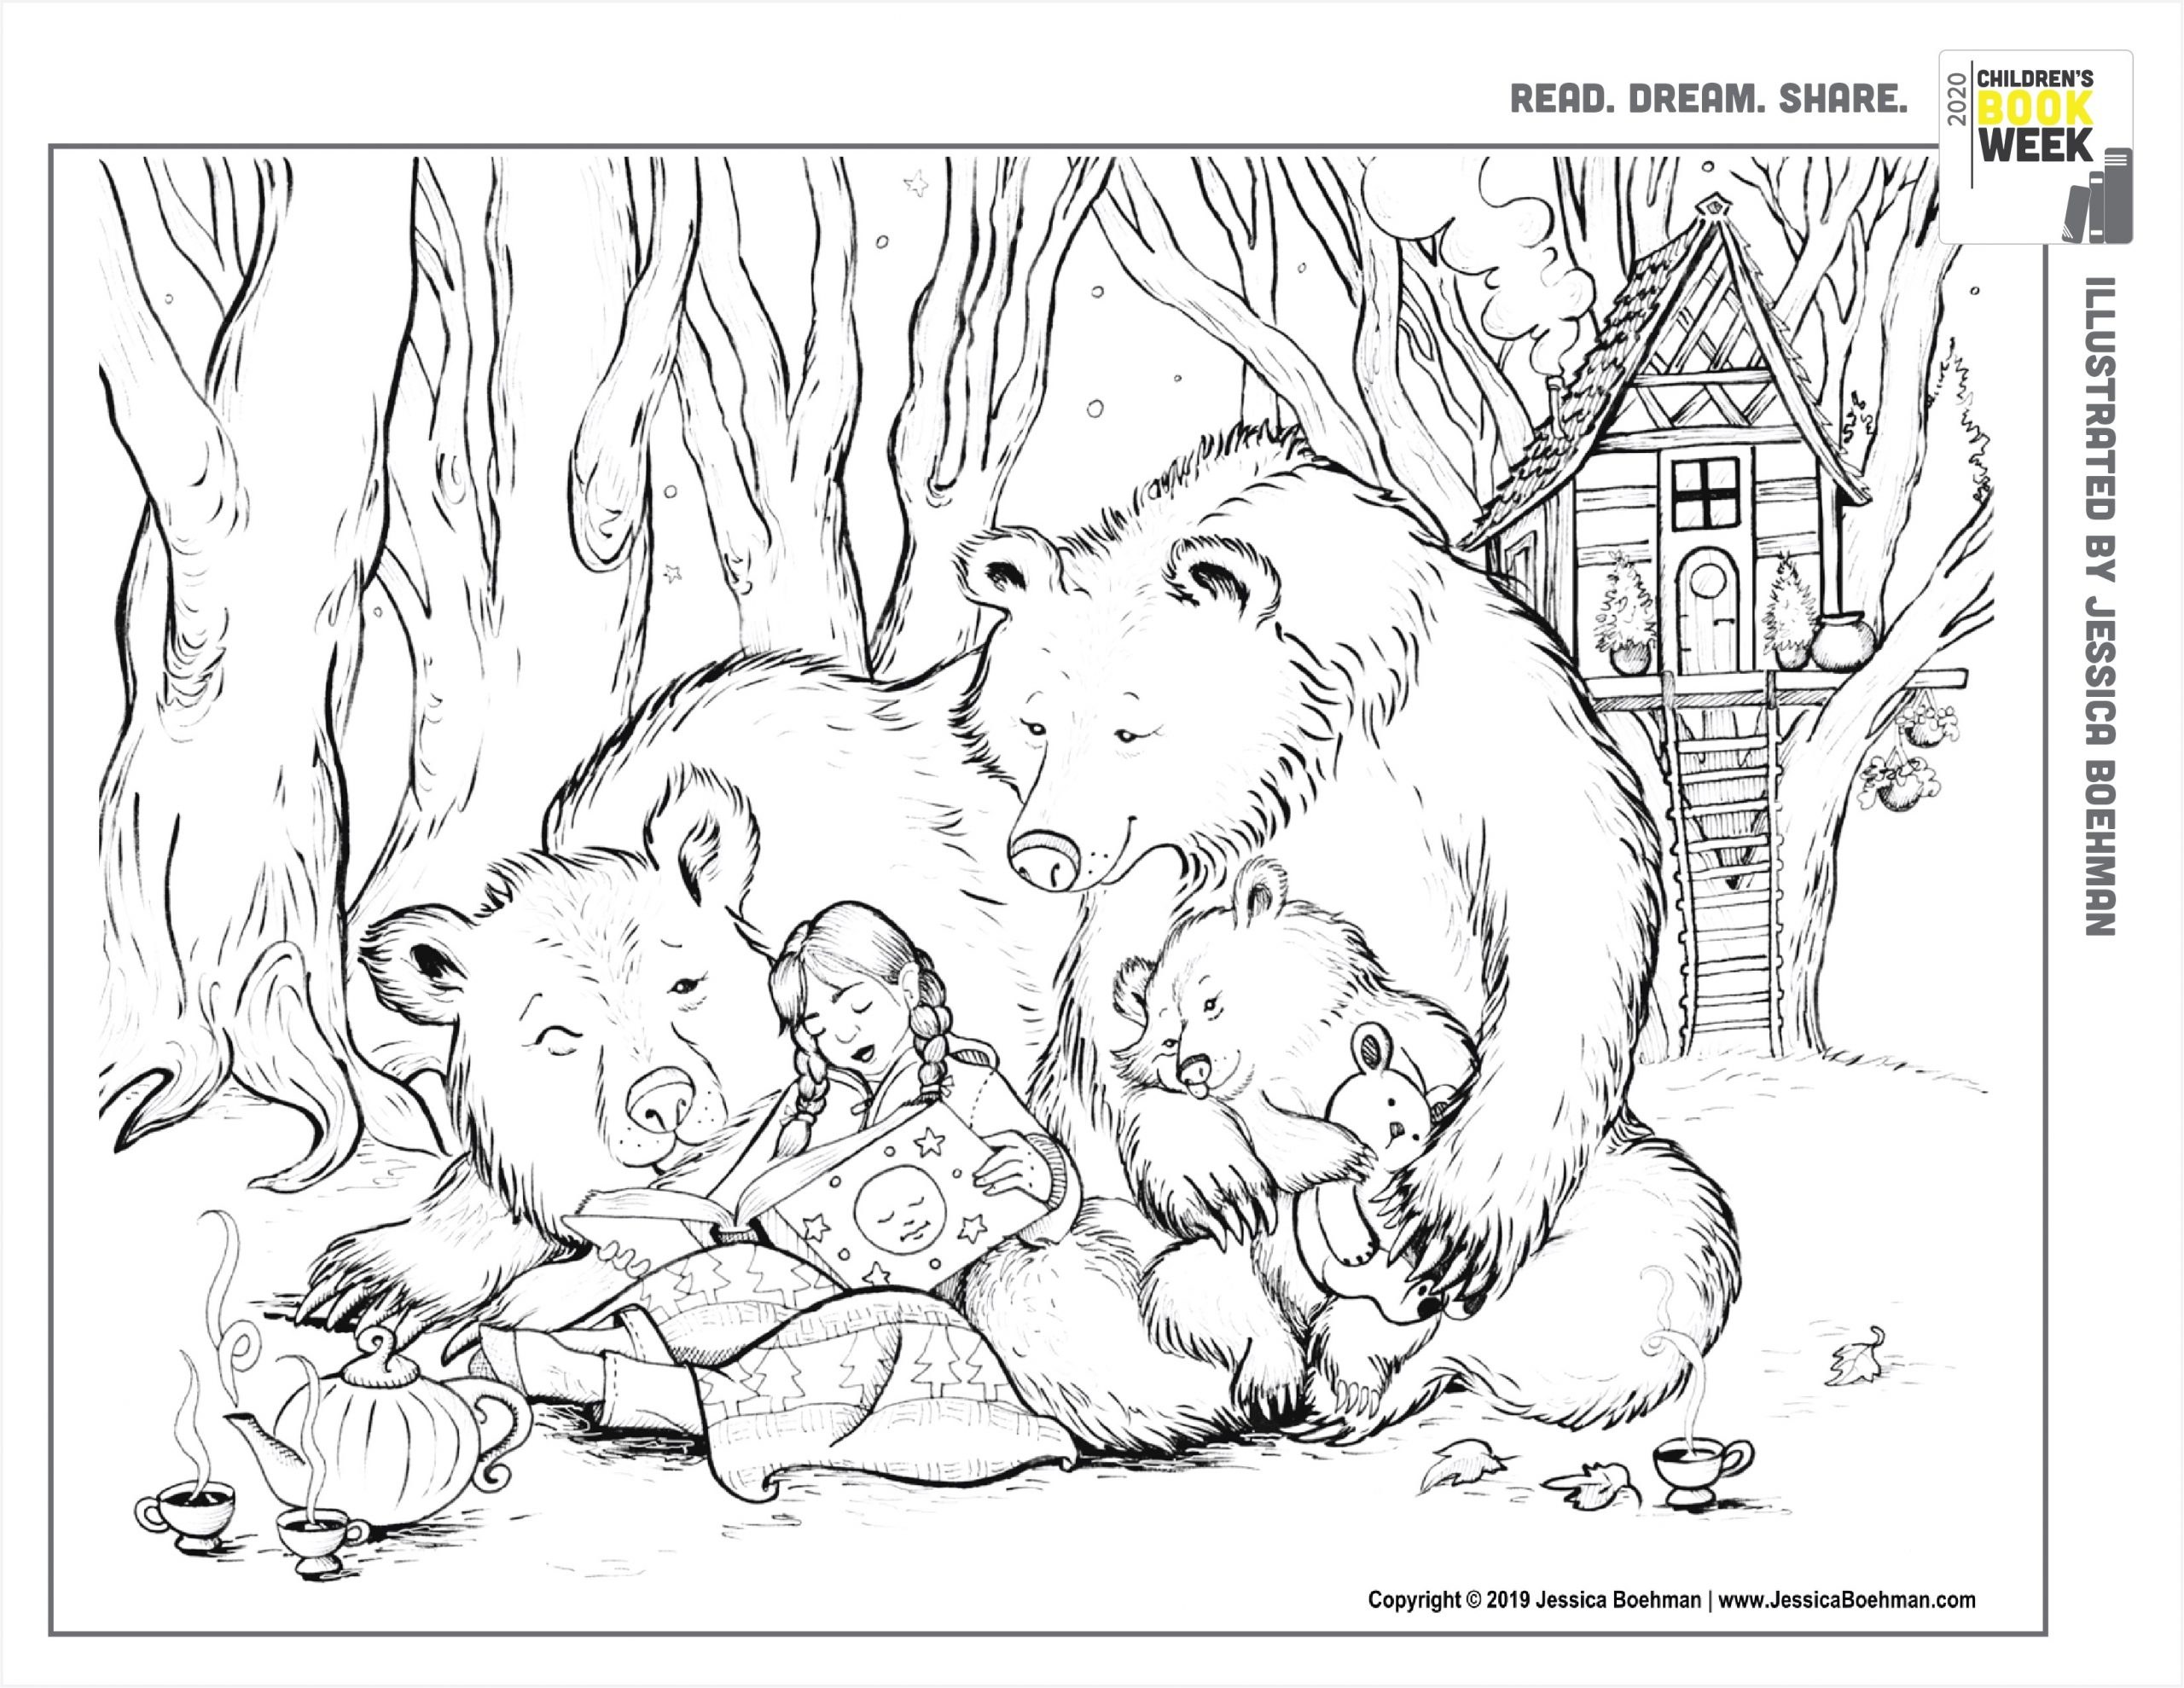 Coloring Book Pages – Every Child a Reader